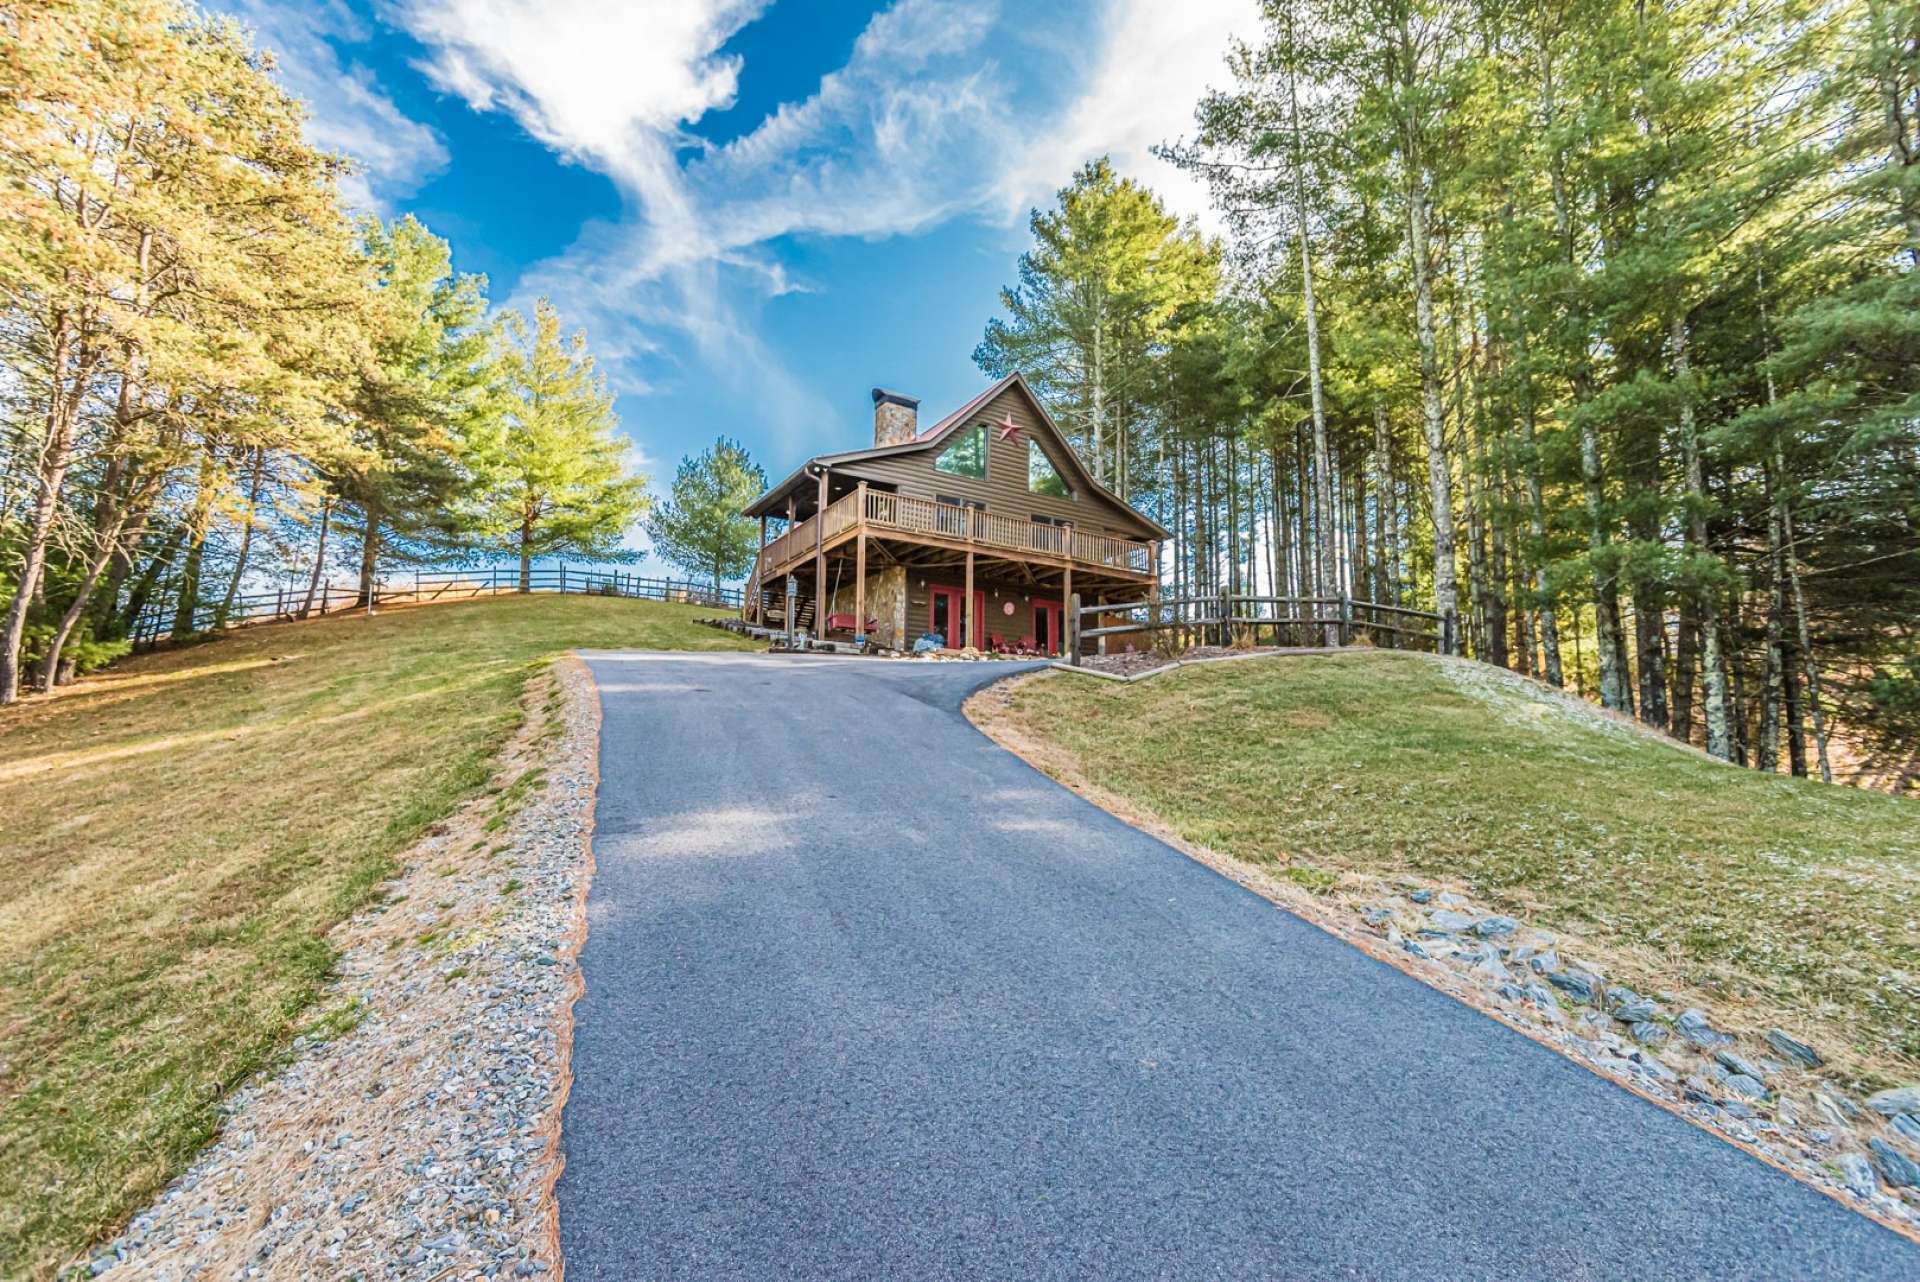 A paved drive leads the way to your mountain home.